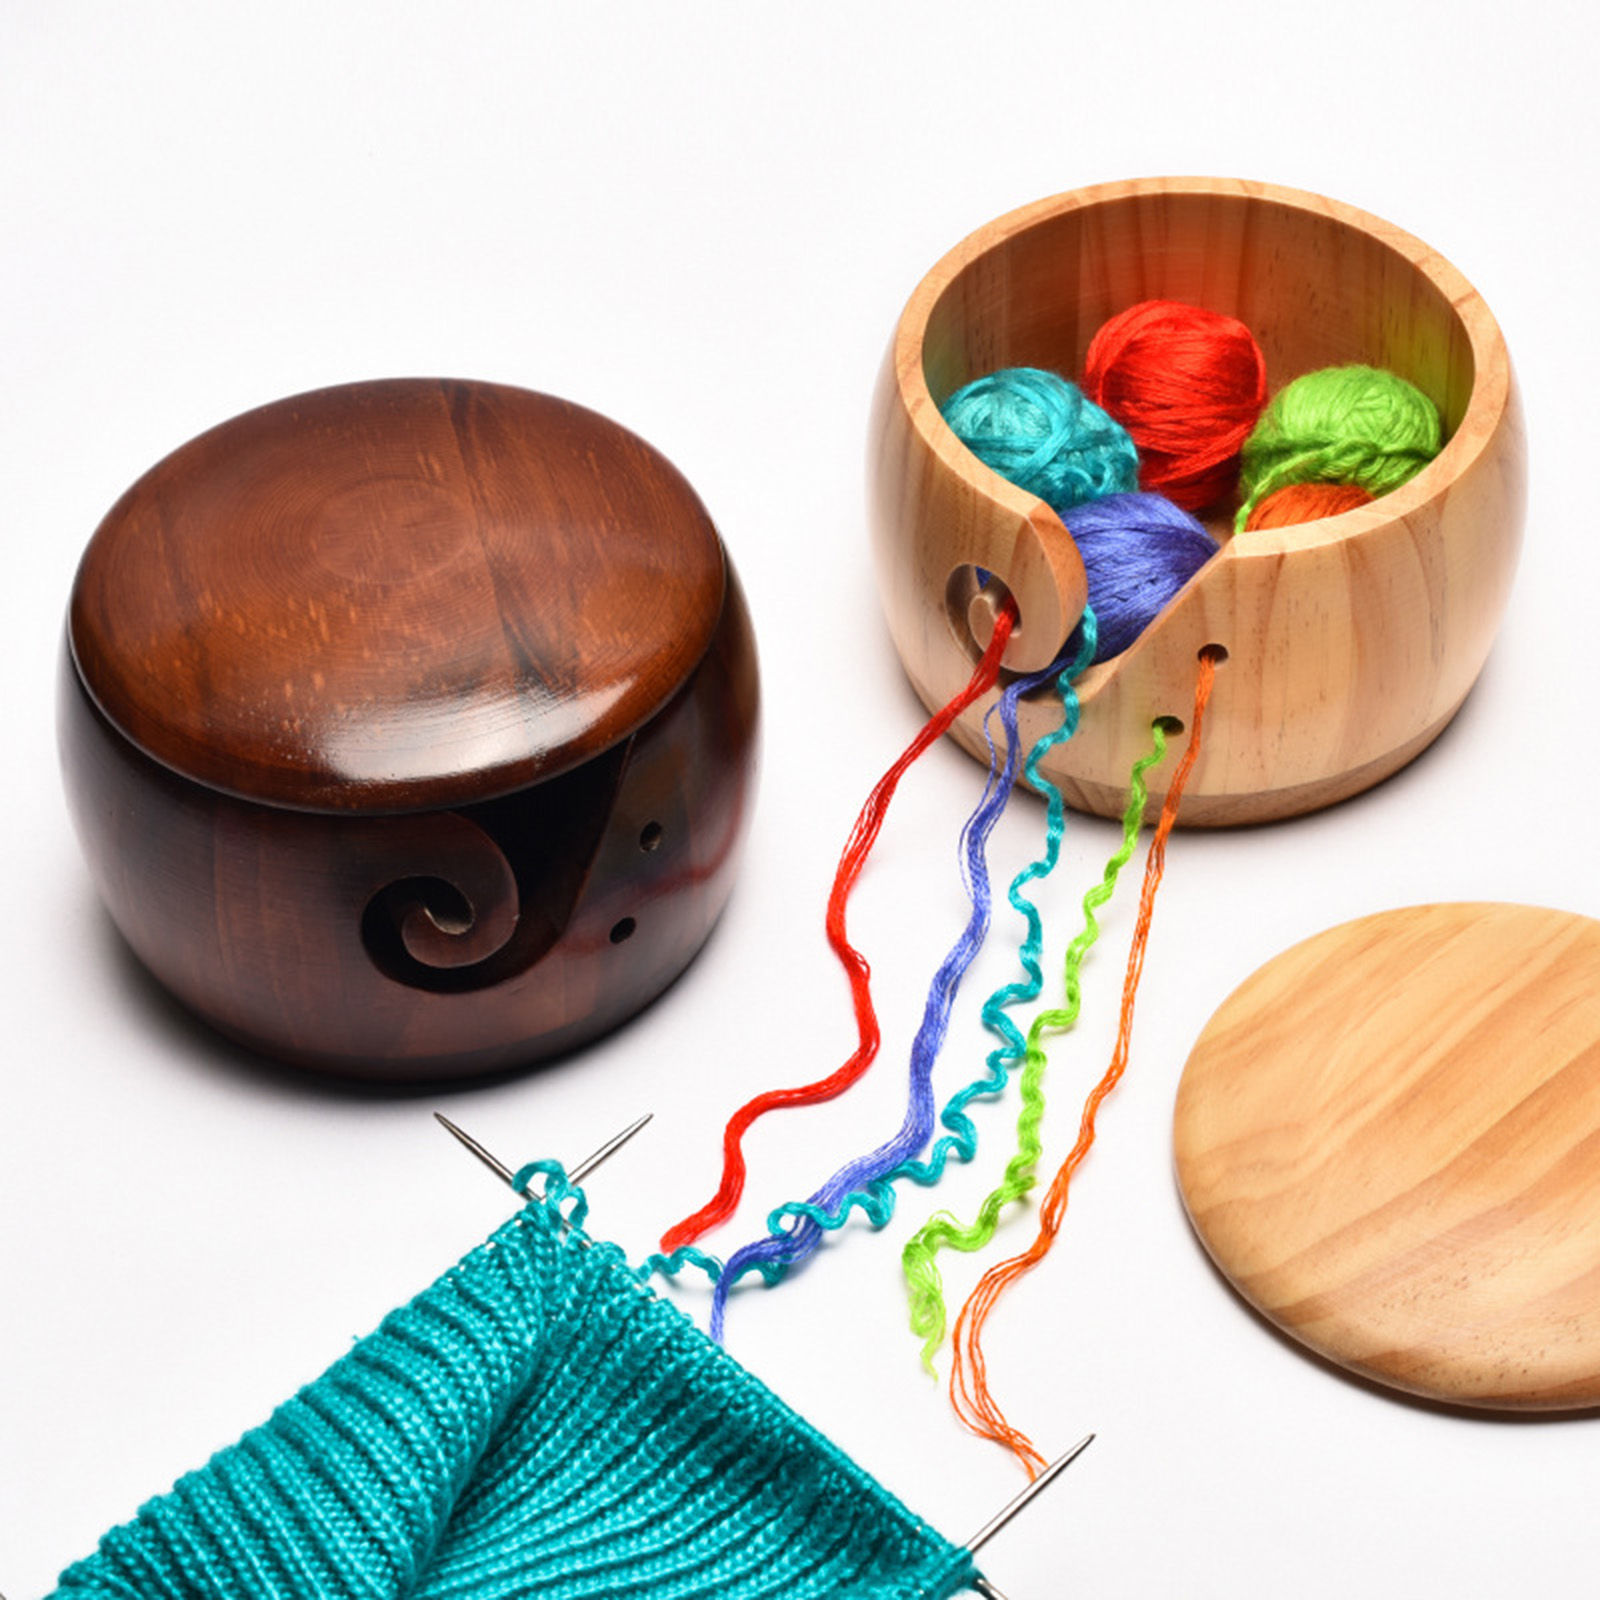 Picture of Wood Yarn Bowl Knitting Crochet Wool Storage Holder Organizer Tool Multicolor